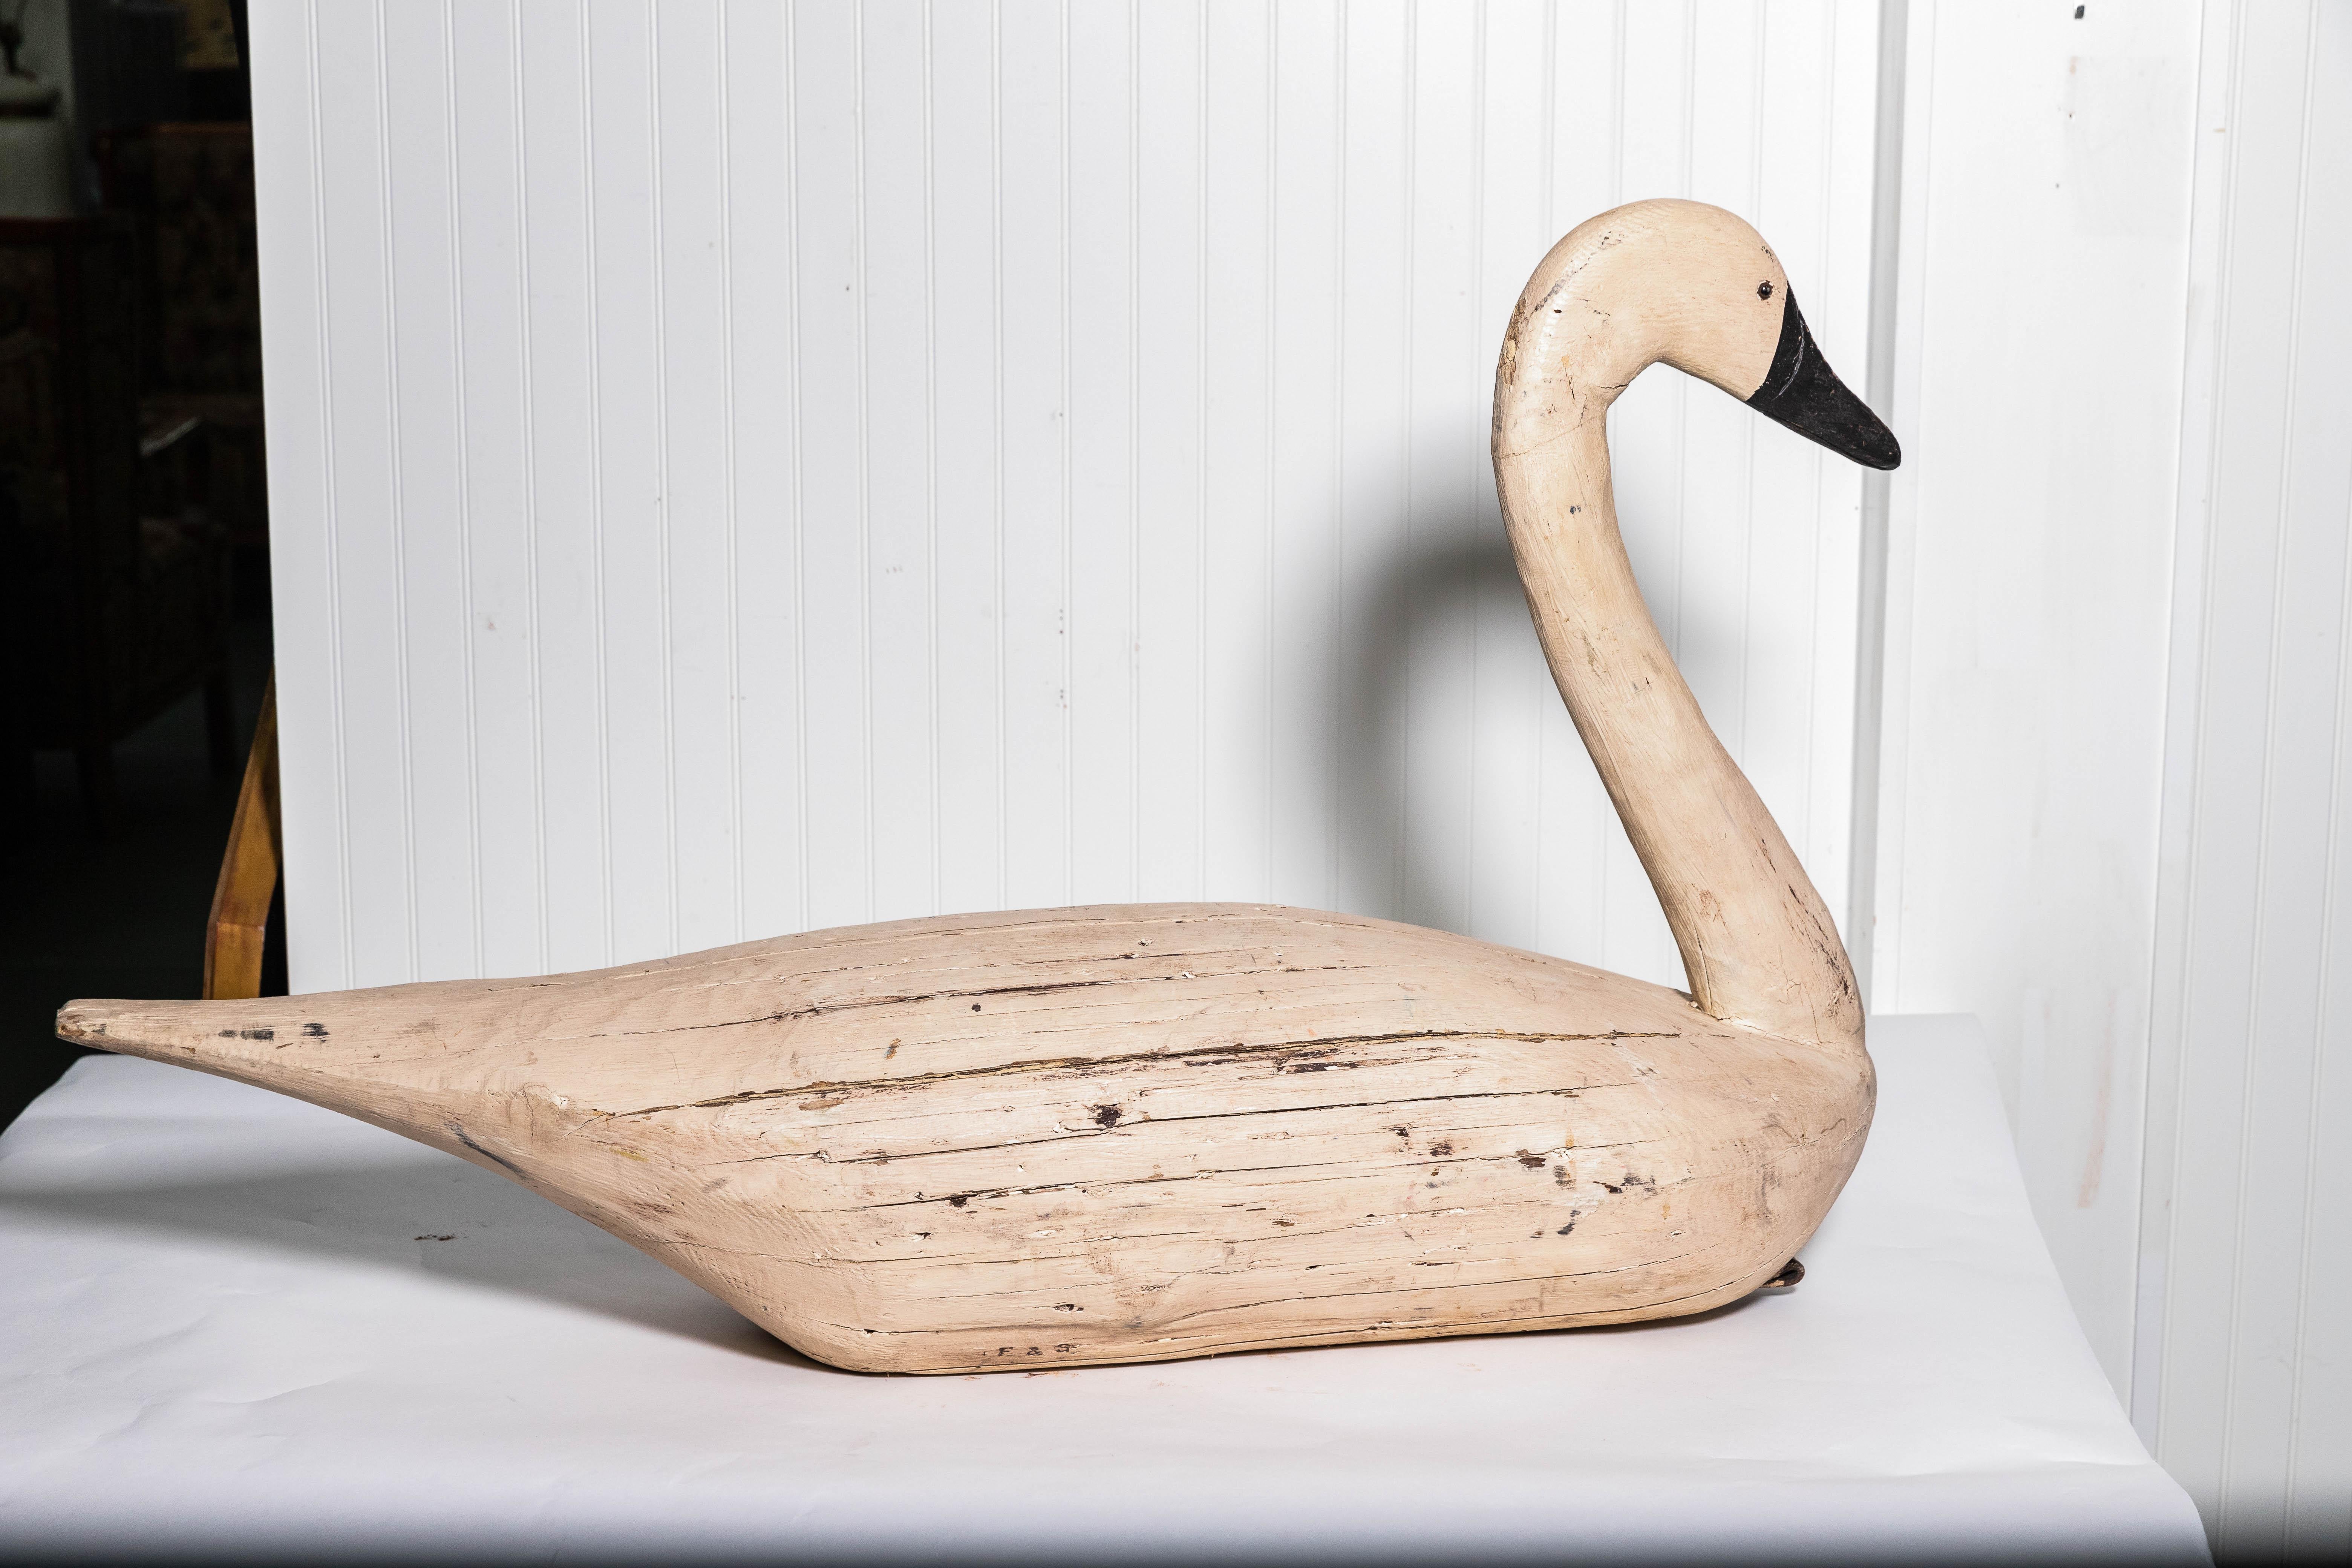 Glass Pair of Monumental Swan Decoy's Early 1900s